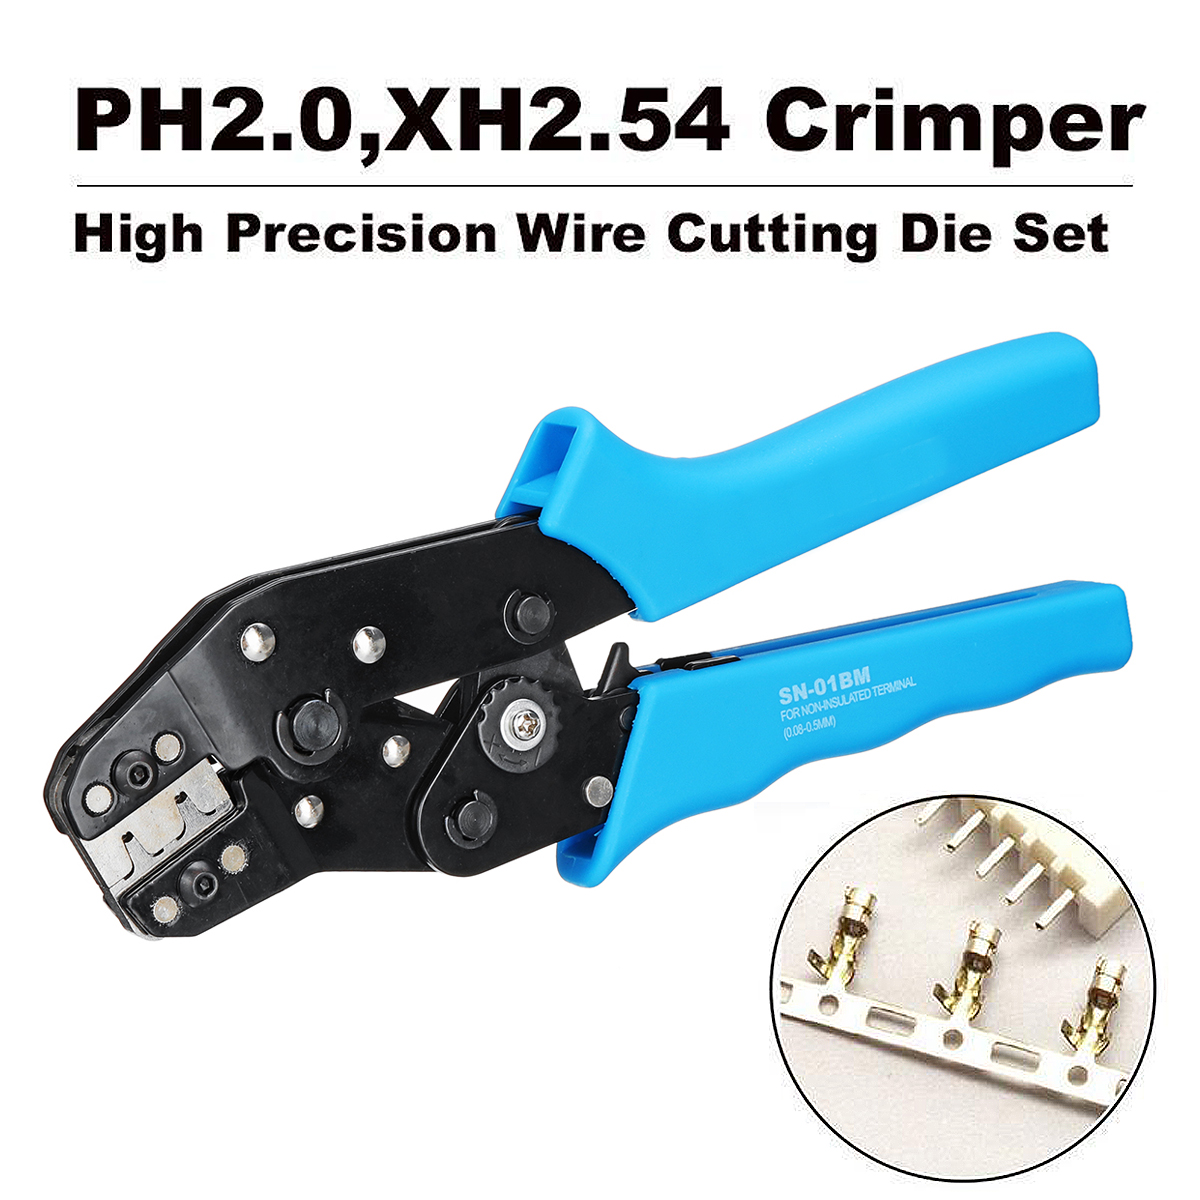 SN-01BM AWG28-20 Self-adjusting Terminal Wire Cable Crimping Pliers Tool for Dupont PH2.0 XH2.54 KF2510 JST Molex D-SUB Terminal 31